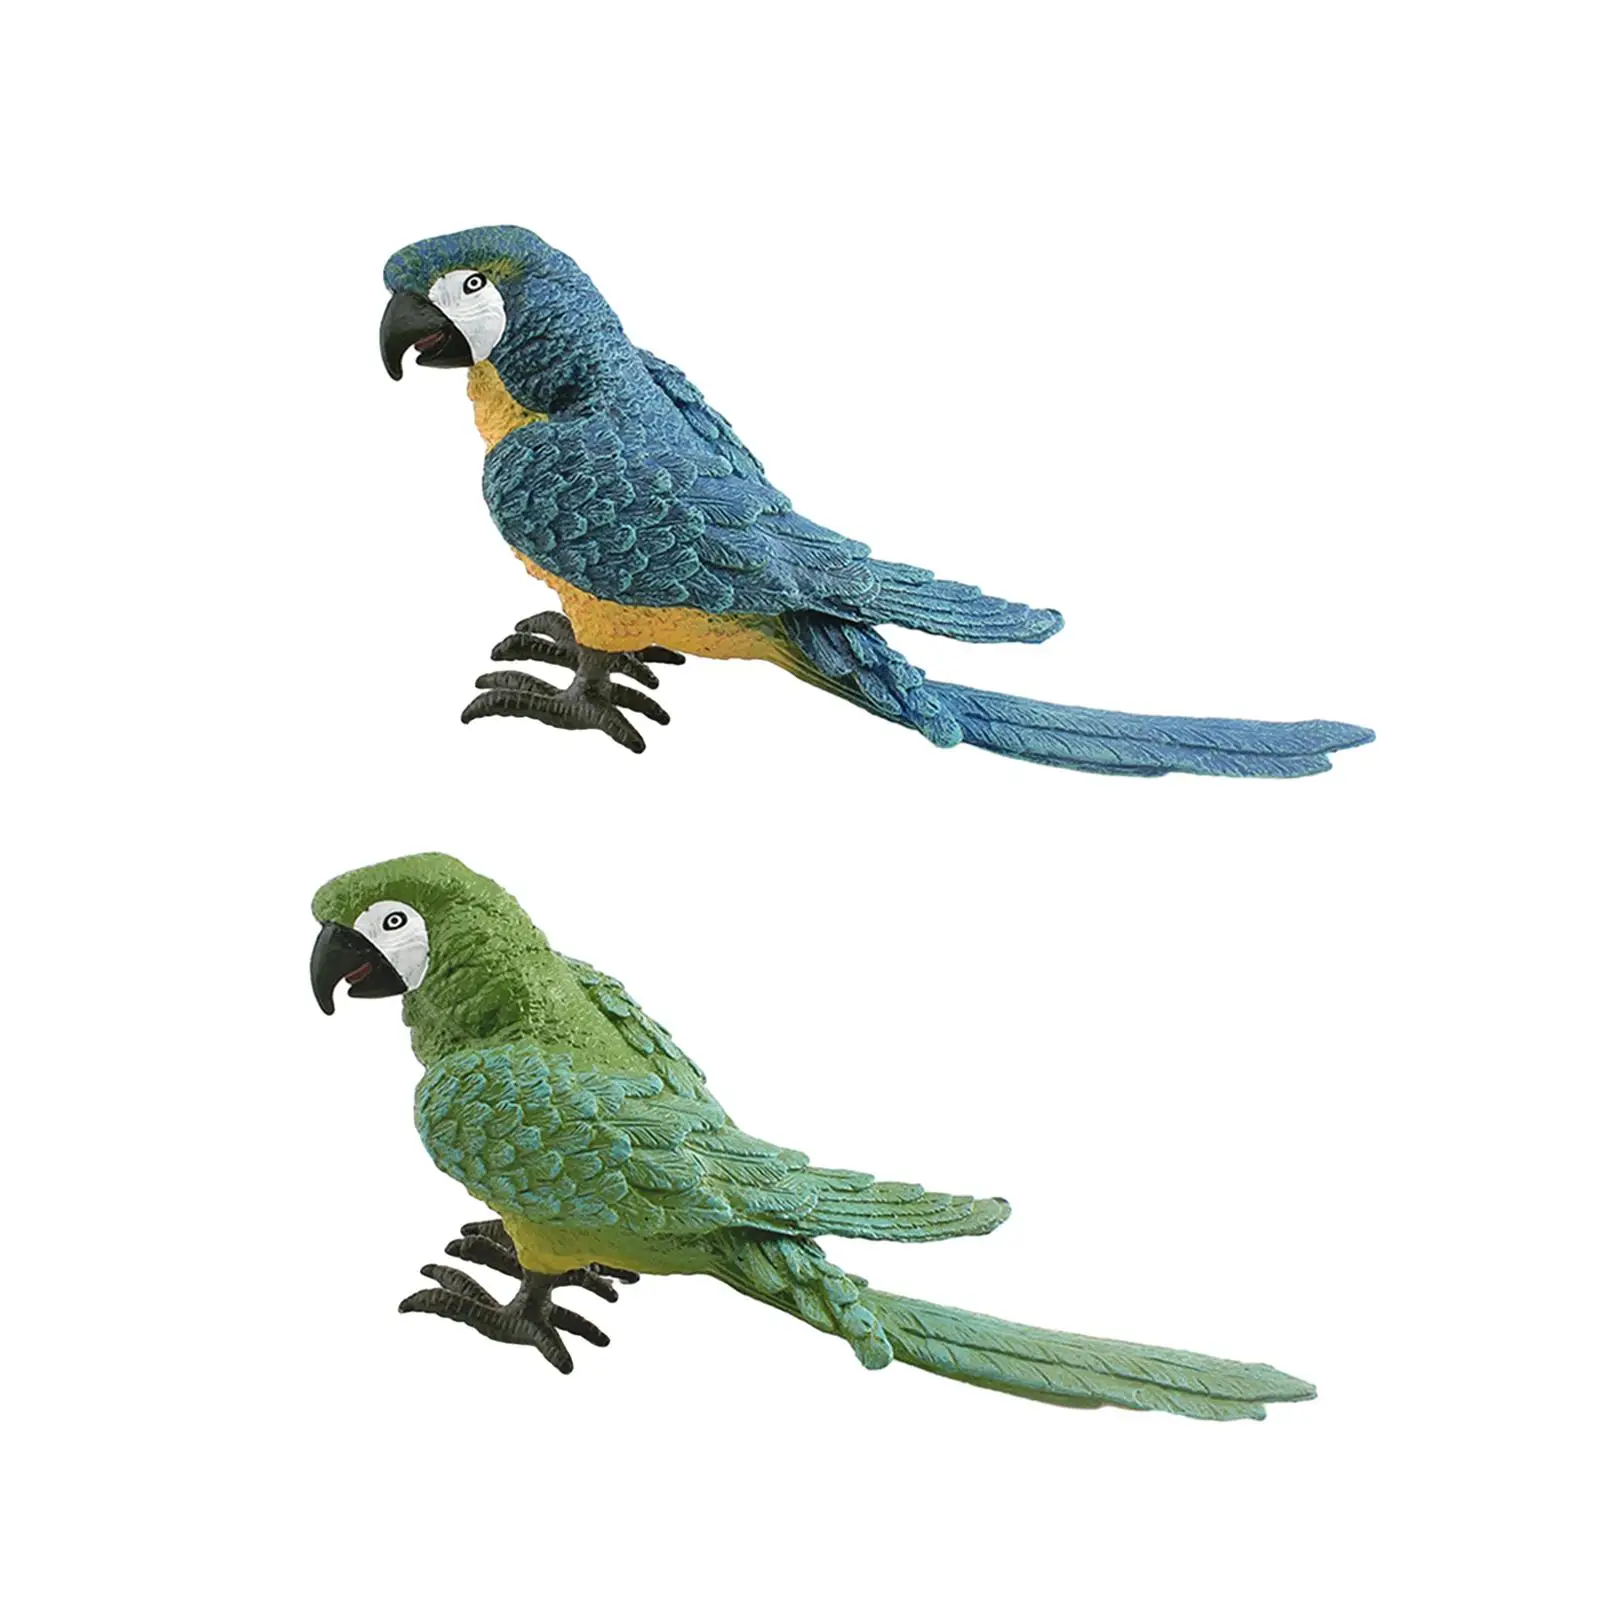 Fake Parrot Decor Model Small Parrot Figurine Birds Ornaments Artificial Parrot Model for Outdoor Home Porch Yard Patio